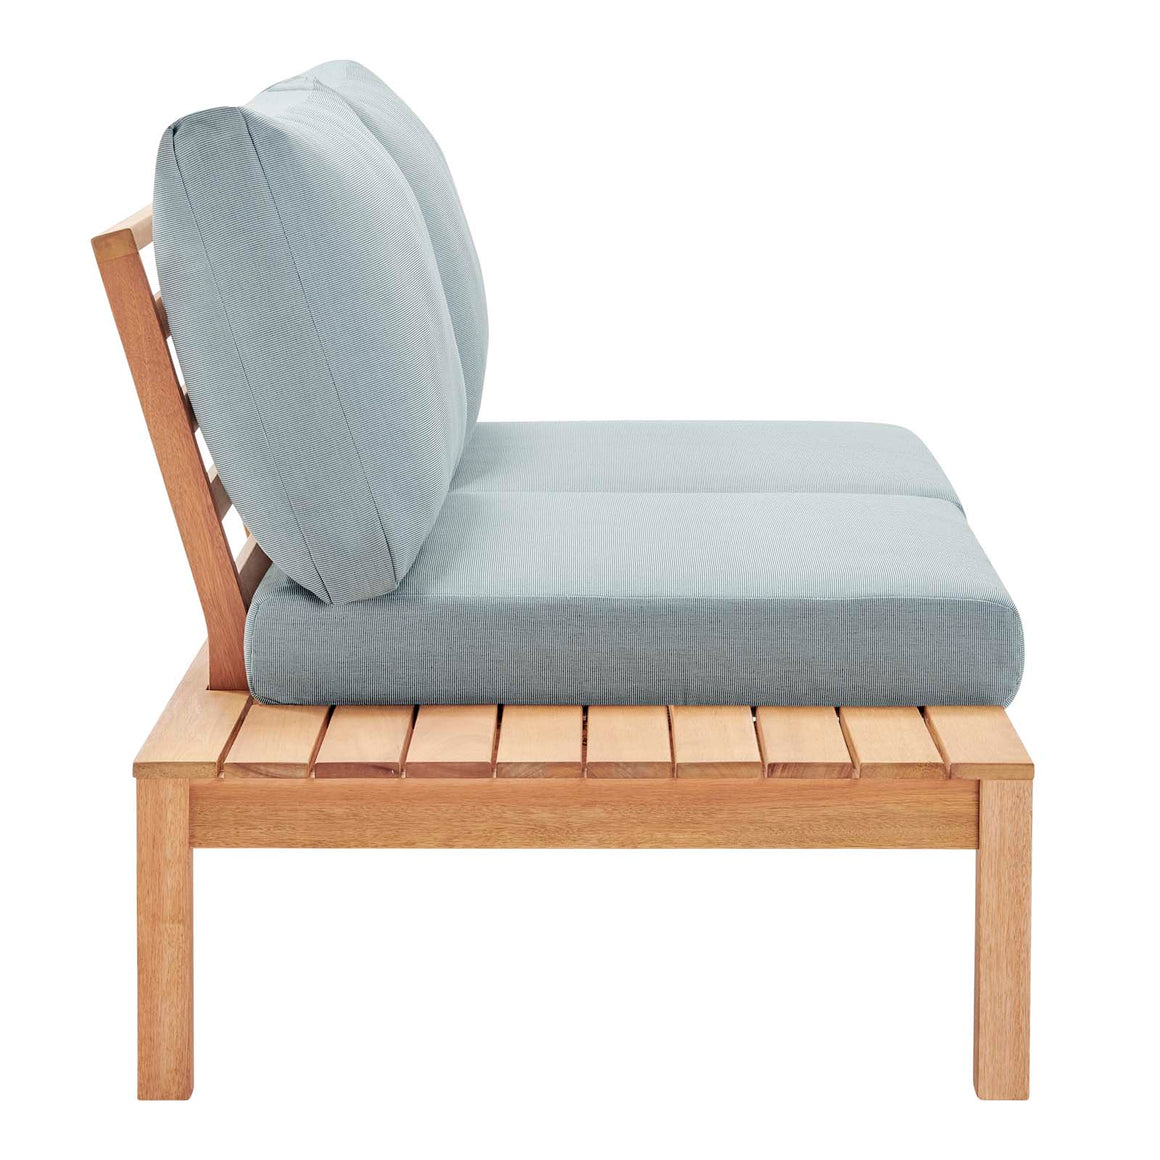 Freeport Karri Wood Outdoor Patio Loveseat with Left-Facing Side End Table Natural Light Blue